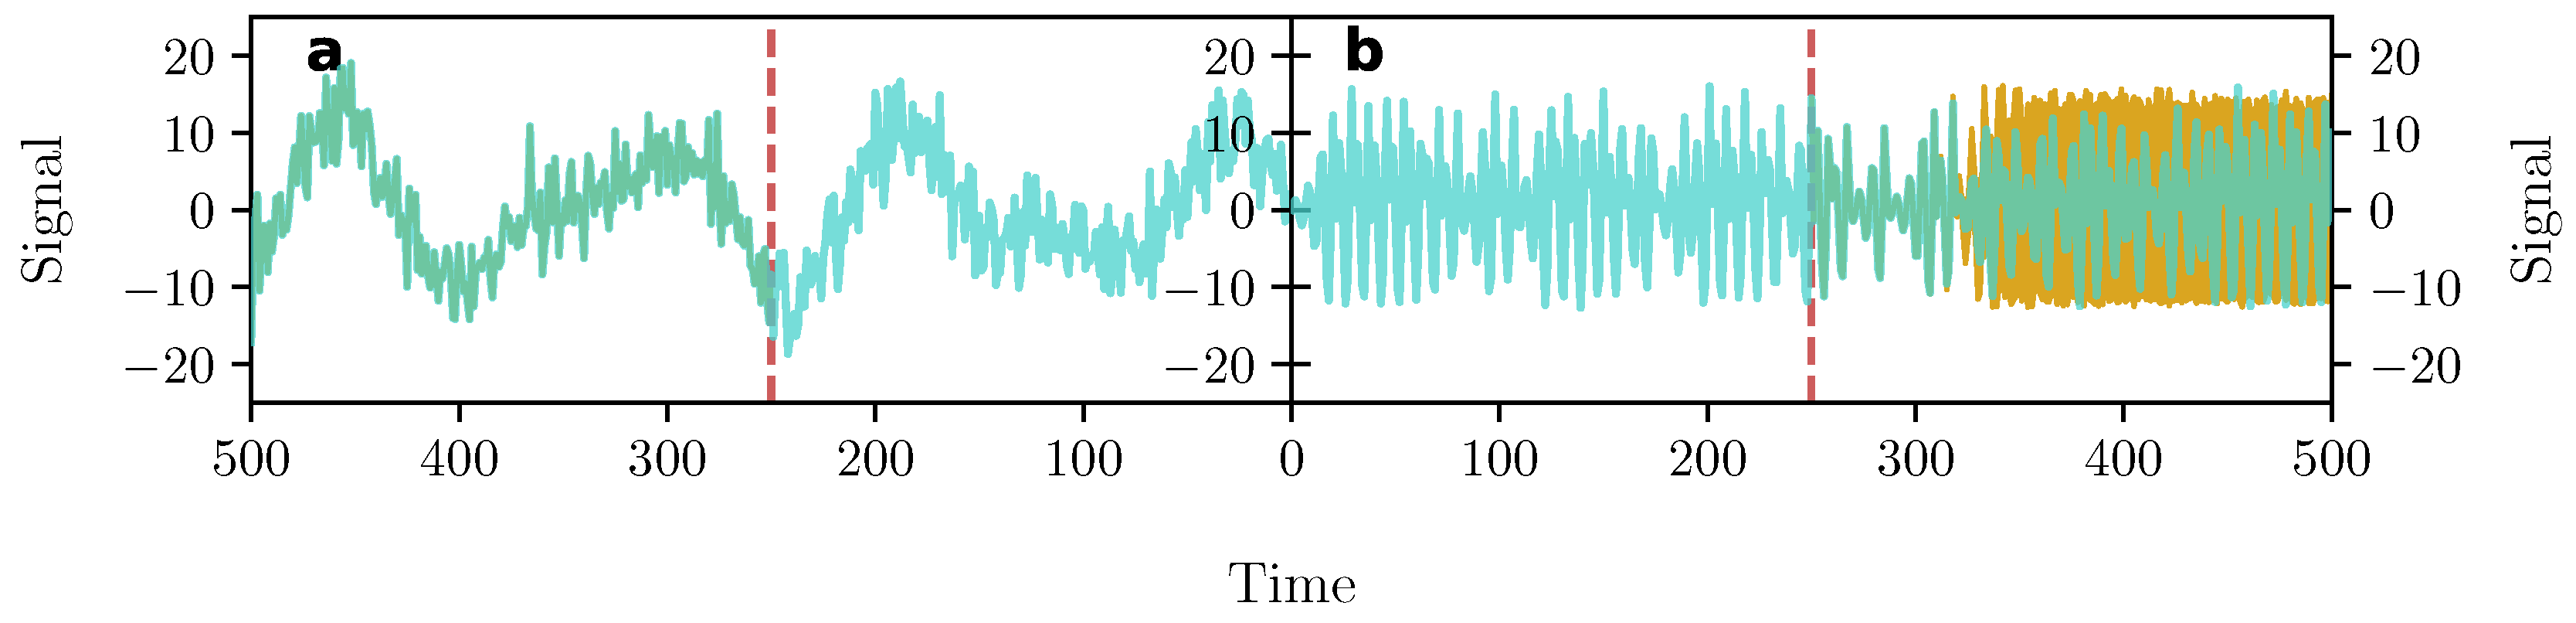 Vibration | Free Full-Text | A Brief Introduction to Nonlinear Time Series  Analysis and Recurrence Plots